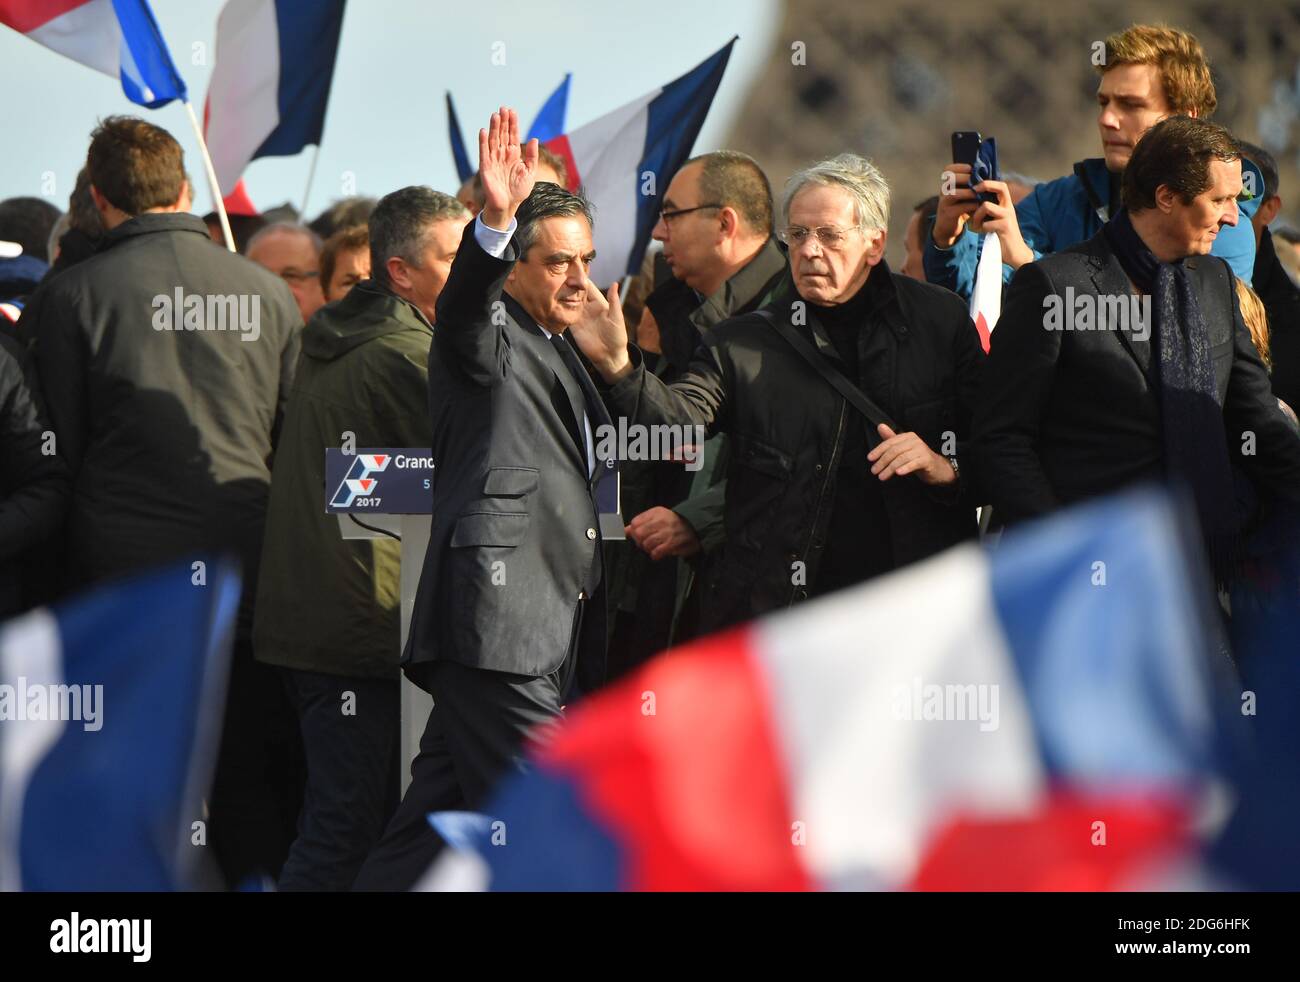 Presidential election candidate for the right-wing Les Republicains (LR) party Francois Fillon gestures during a rally at the Place du Trocadero, in Paris, France, on March 5, 2017. Embattled French conservative Francois Fillon told supporters to never give up the fight as he strivses to stay in the presidential election race amid an expenses scandal. Fillon, who is to be charged over claims he gave his wife and children highly-paid fake parliamentary jobs, told the rain-drenched crowd he had been attacked by everyone in the campaign. Photo by Christian Liewig/ABACAPRESS.COM Stock Photo